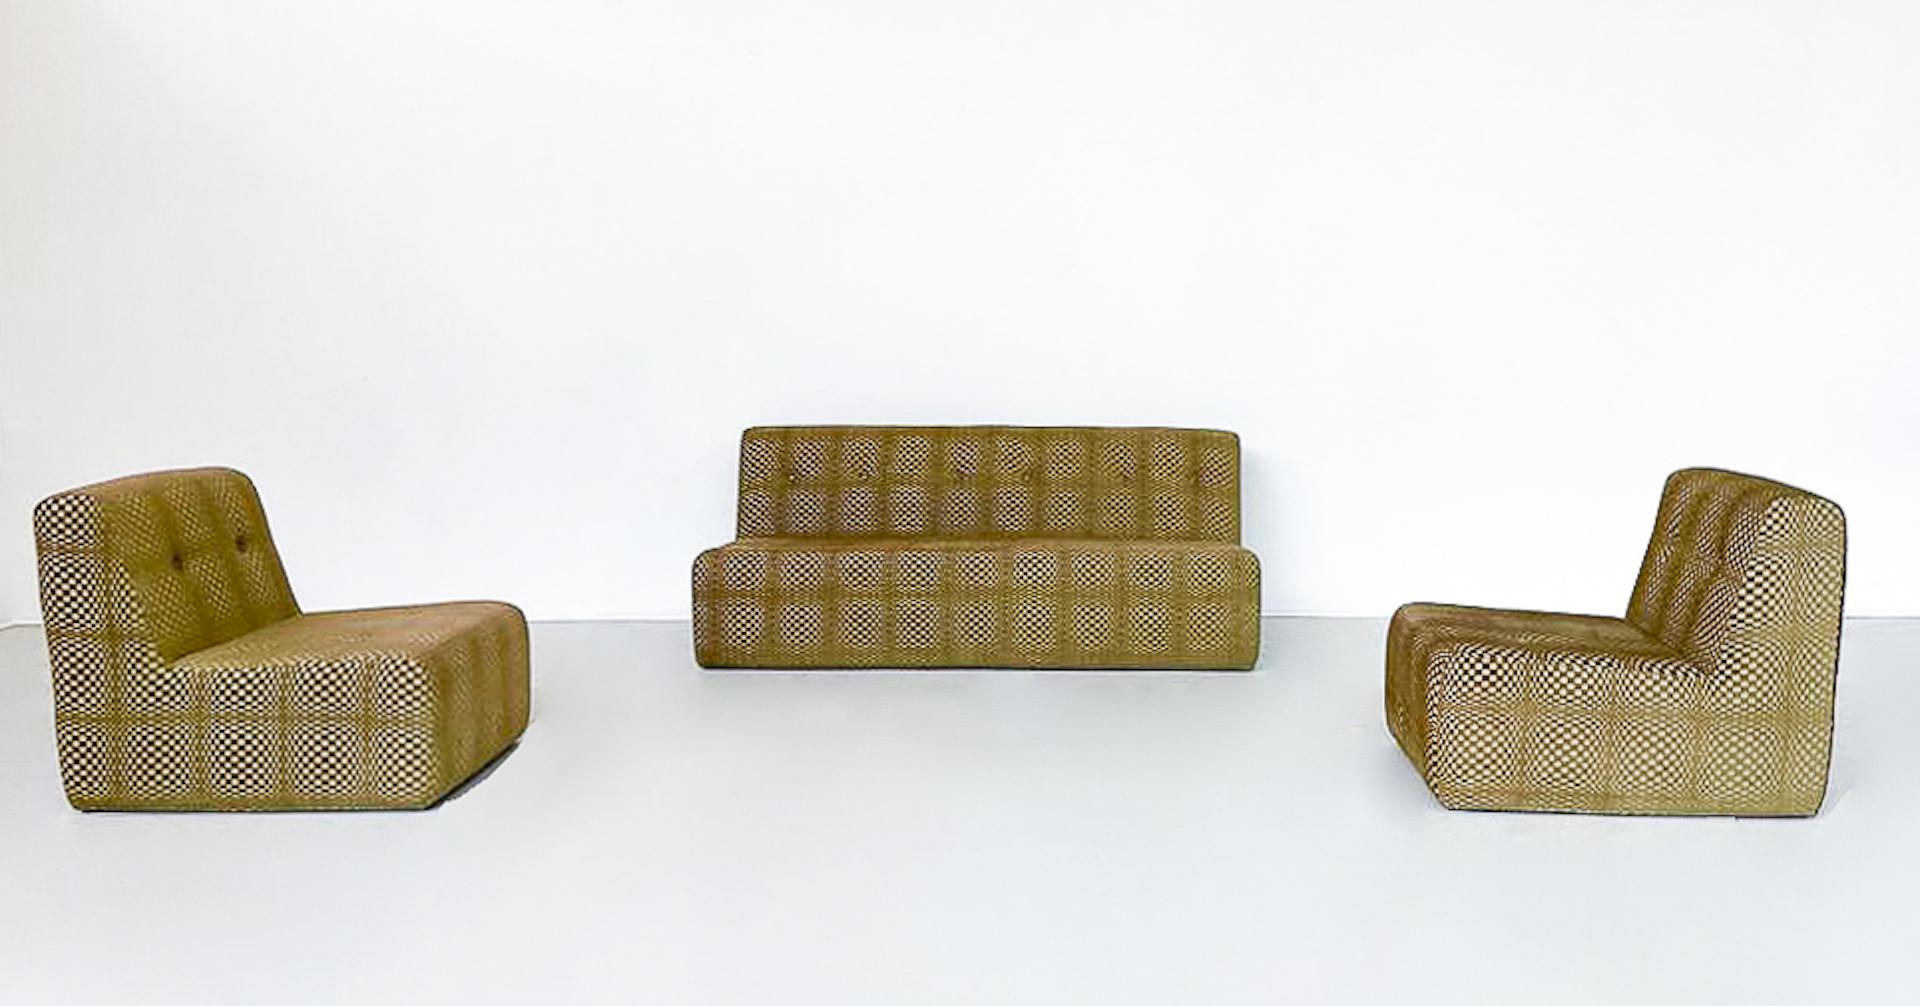 Late 20th Century Mid-Century Modern Seating Set, Italy, 1970s - Original Fabric For Sale